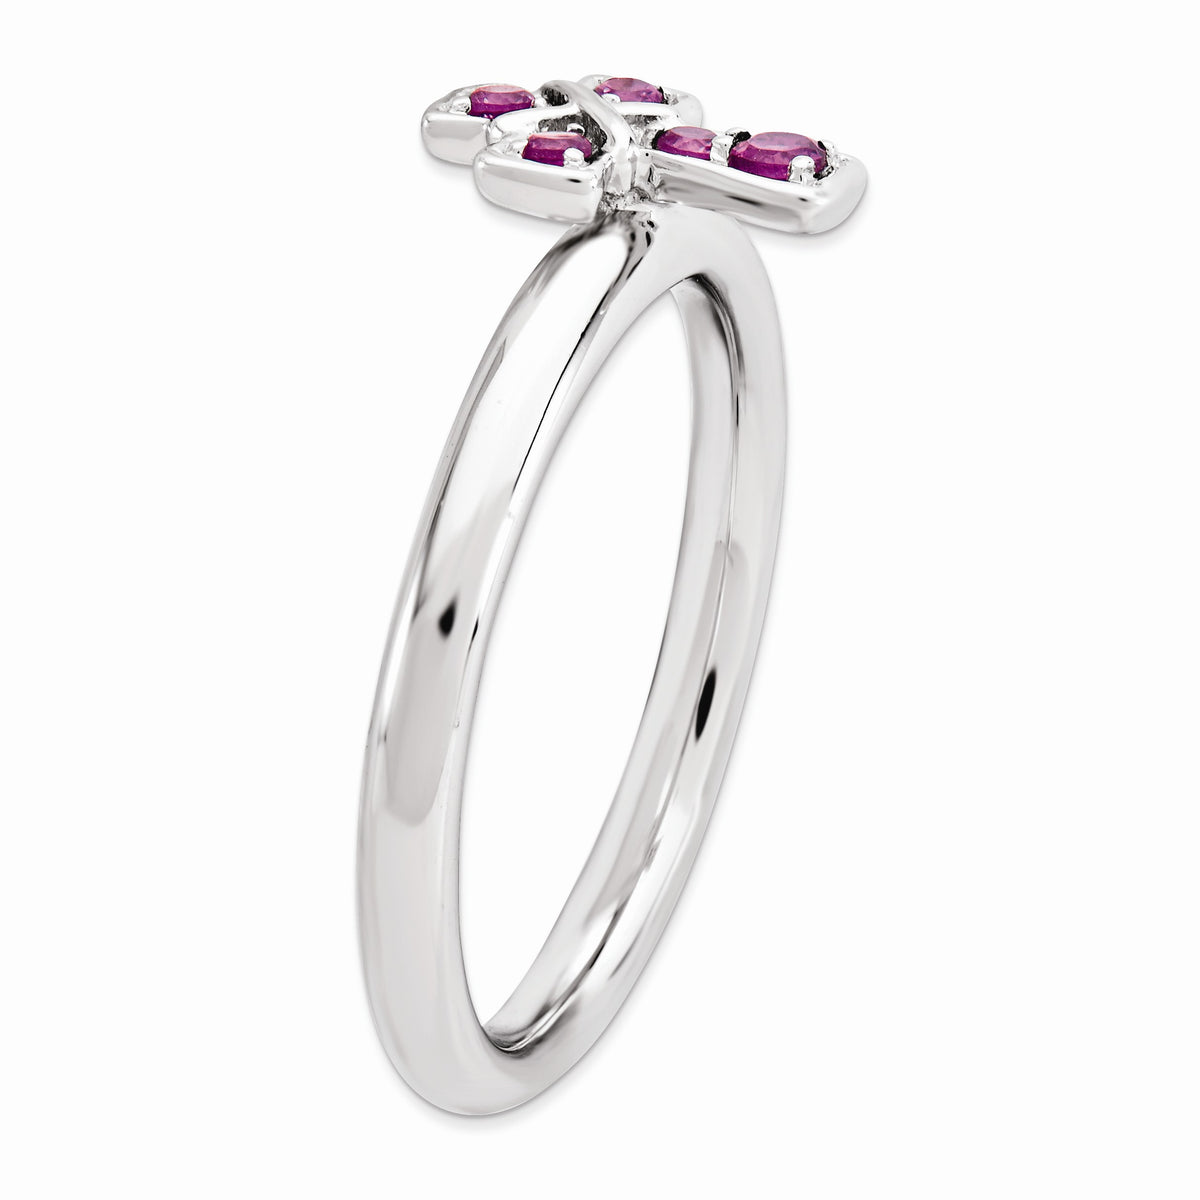 Alternate view of the Rhodium Sterling Silver Stackable Rhodolite Garnet 9mm Cross Ring by The Black Bow Jewelry Co.